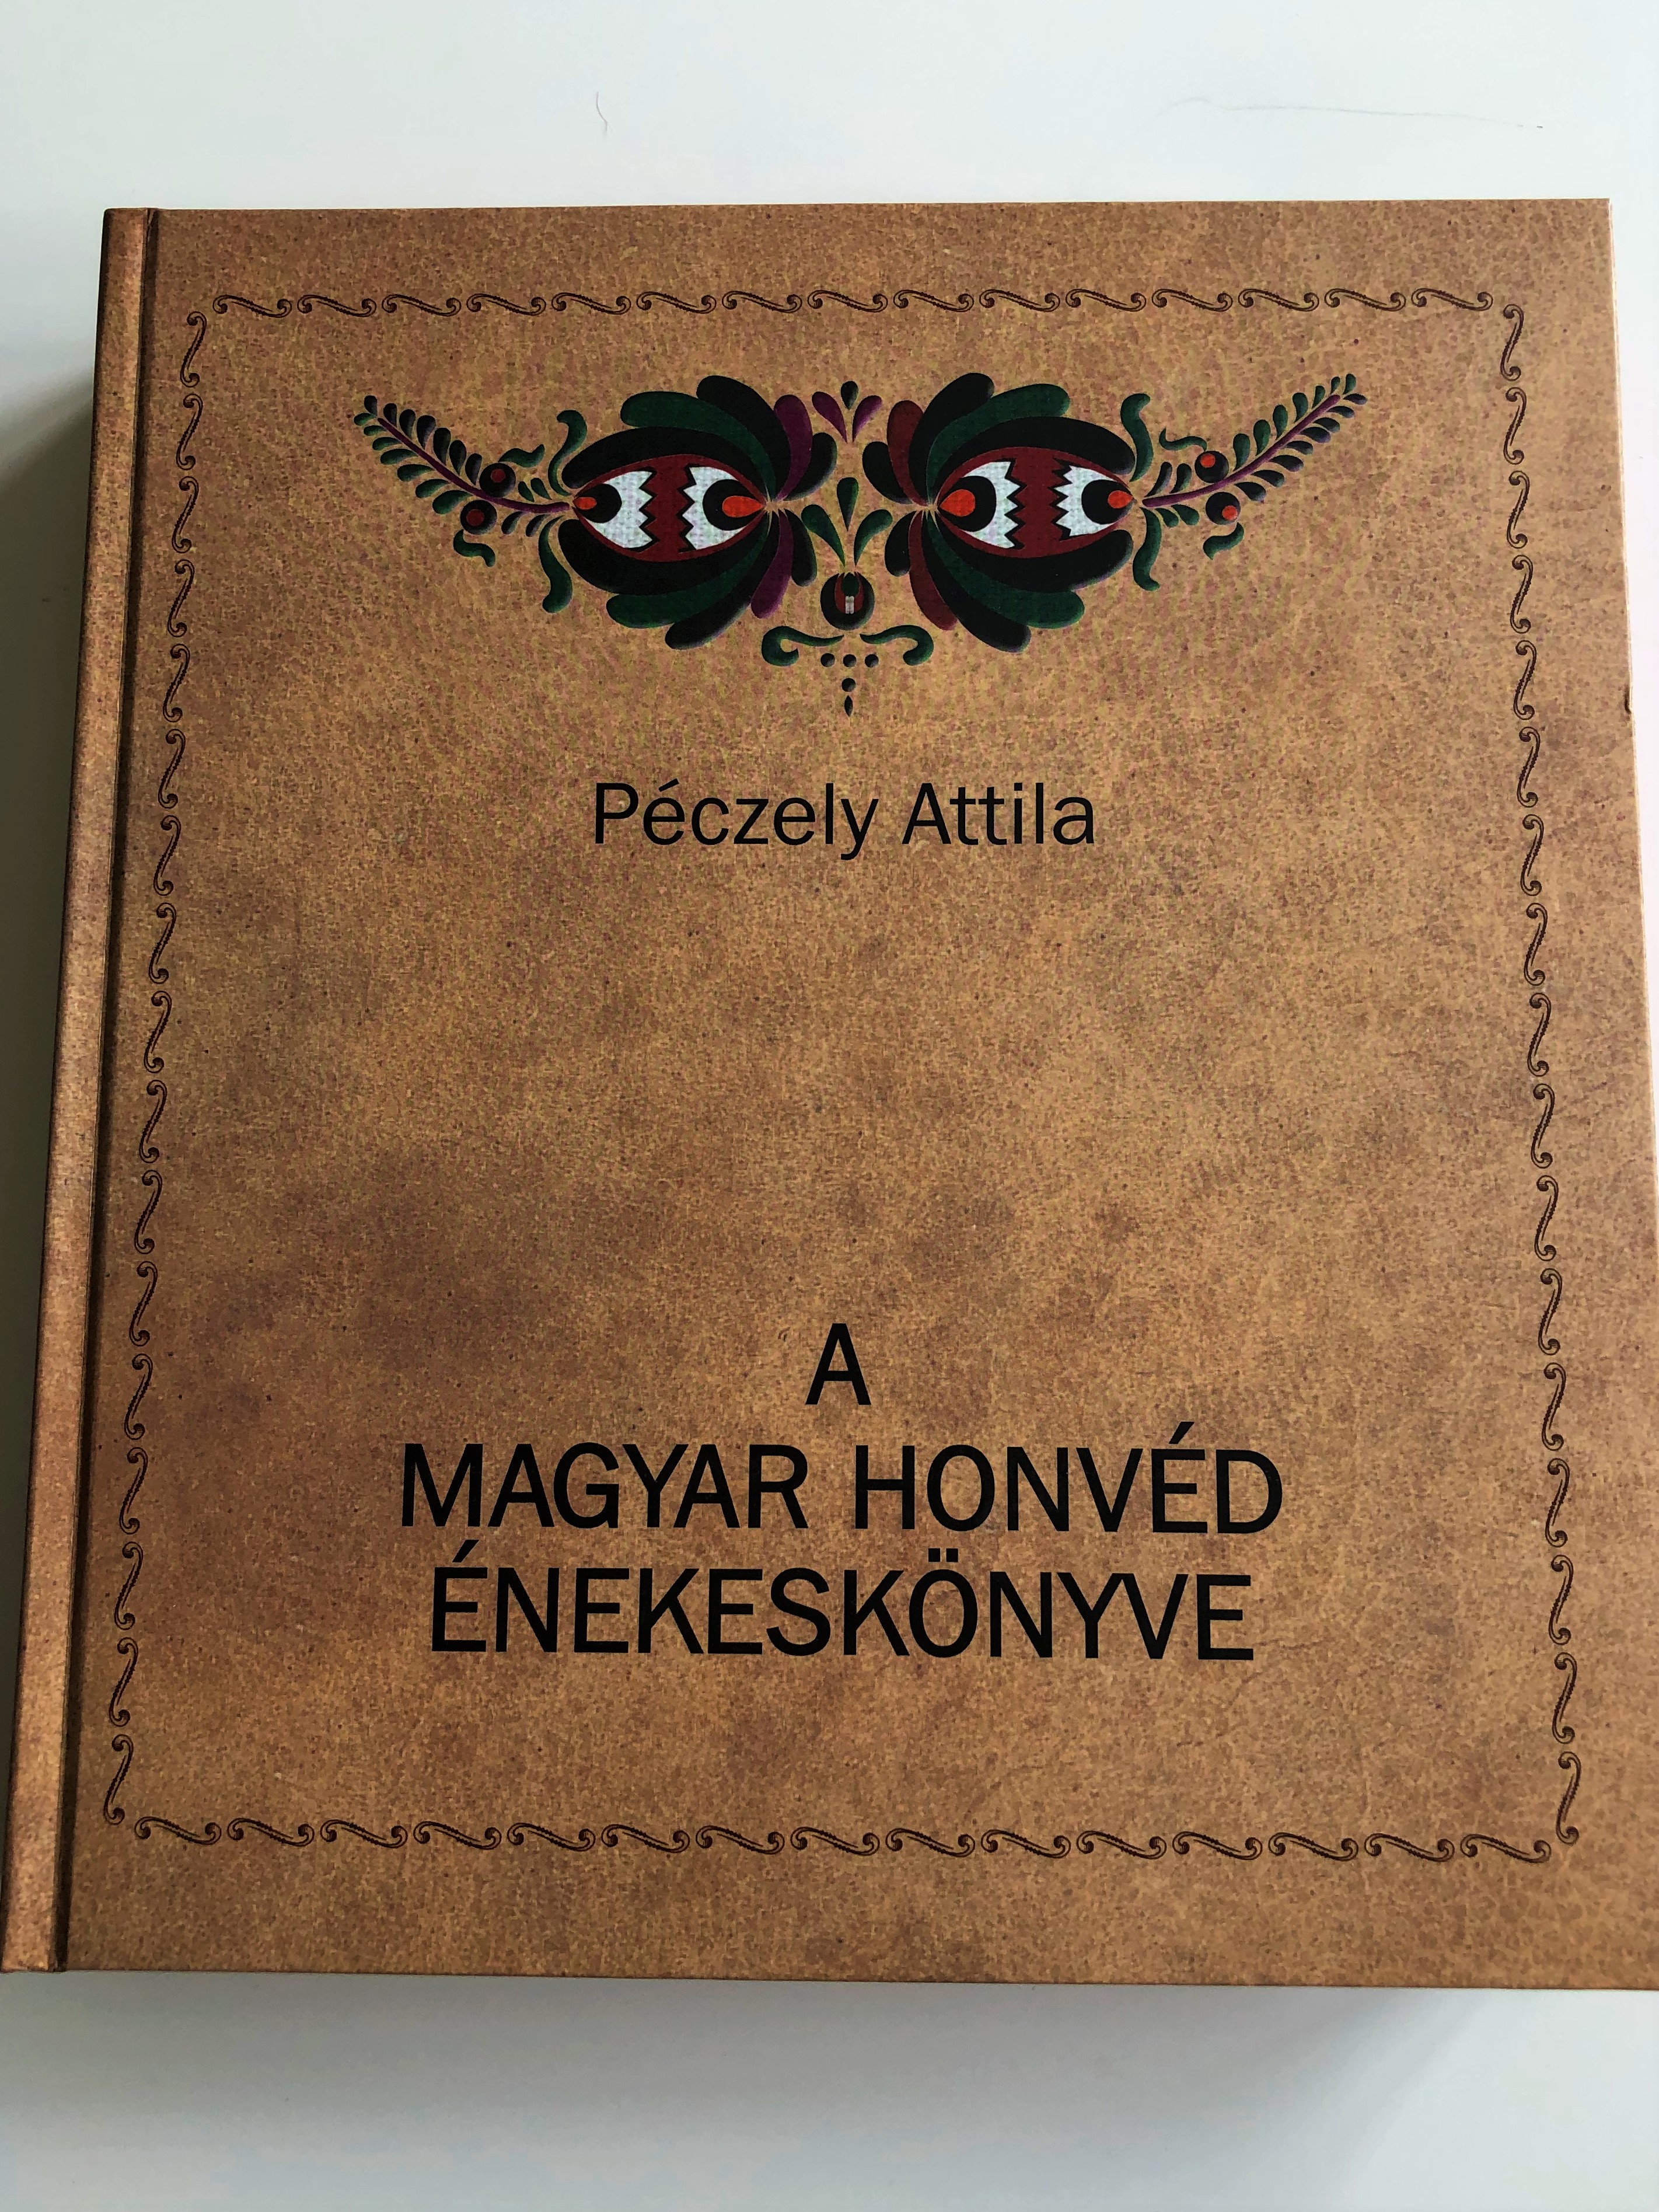 a-magyar-honv-d-nekesk-nyve-by-p-czely-attila-the-songbook-of-the-hungarian-defence-soldier-1937-hardcover-facsimile-2015-hm-zr-nyi-kiad-1-.jpg